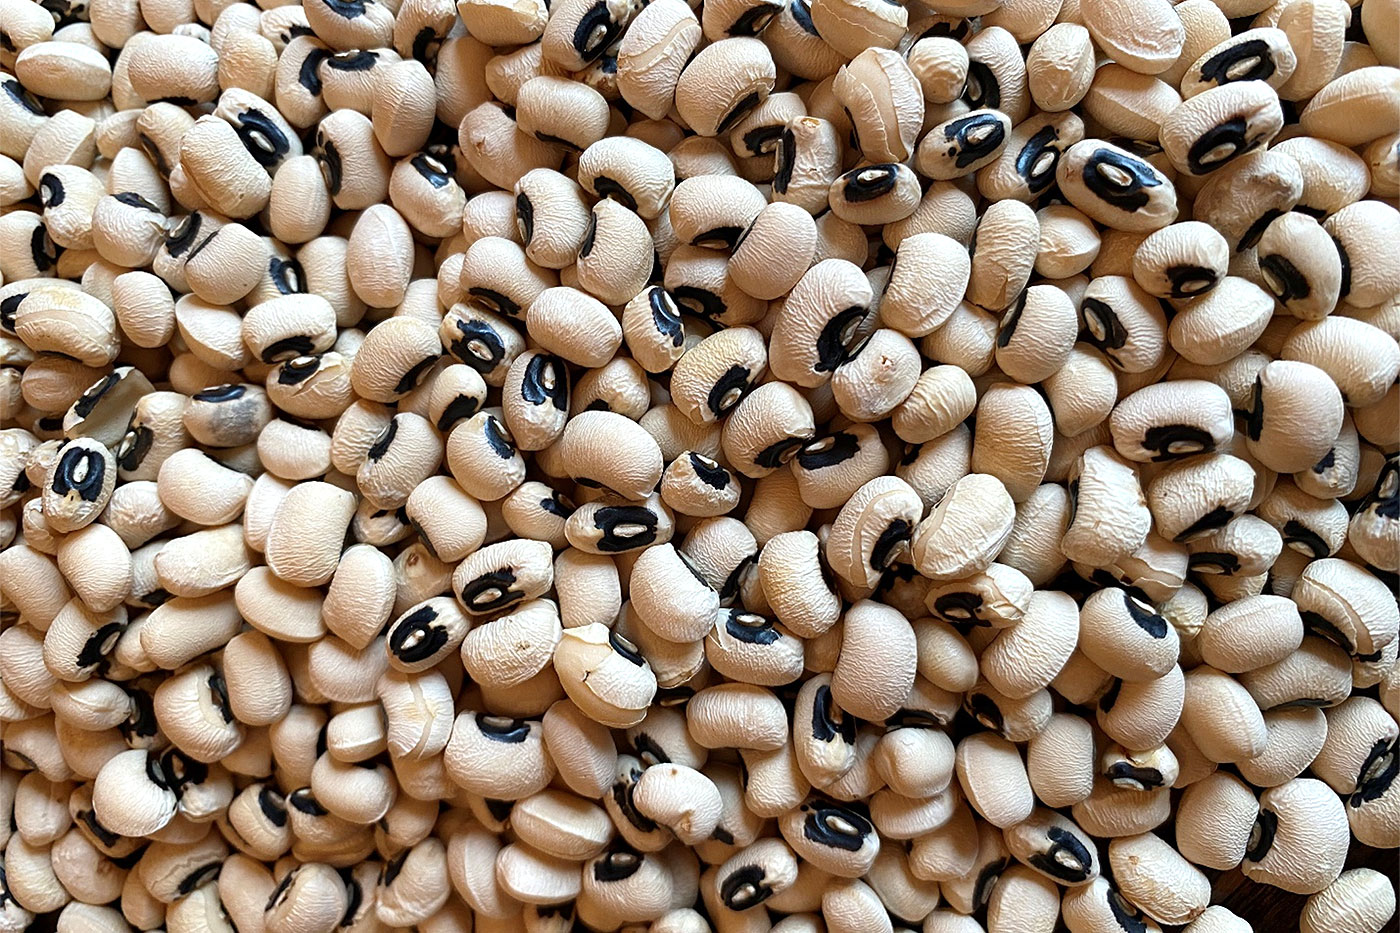 Ring in the New Year with Black-eyed Peas for Good Luck and